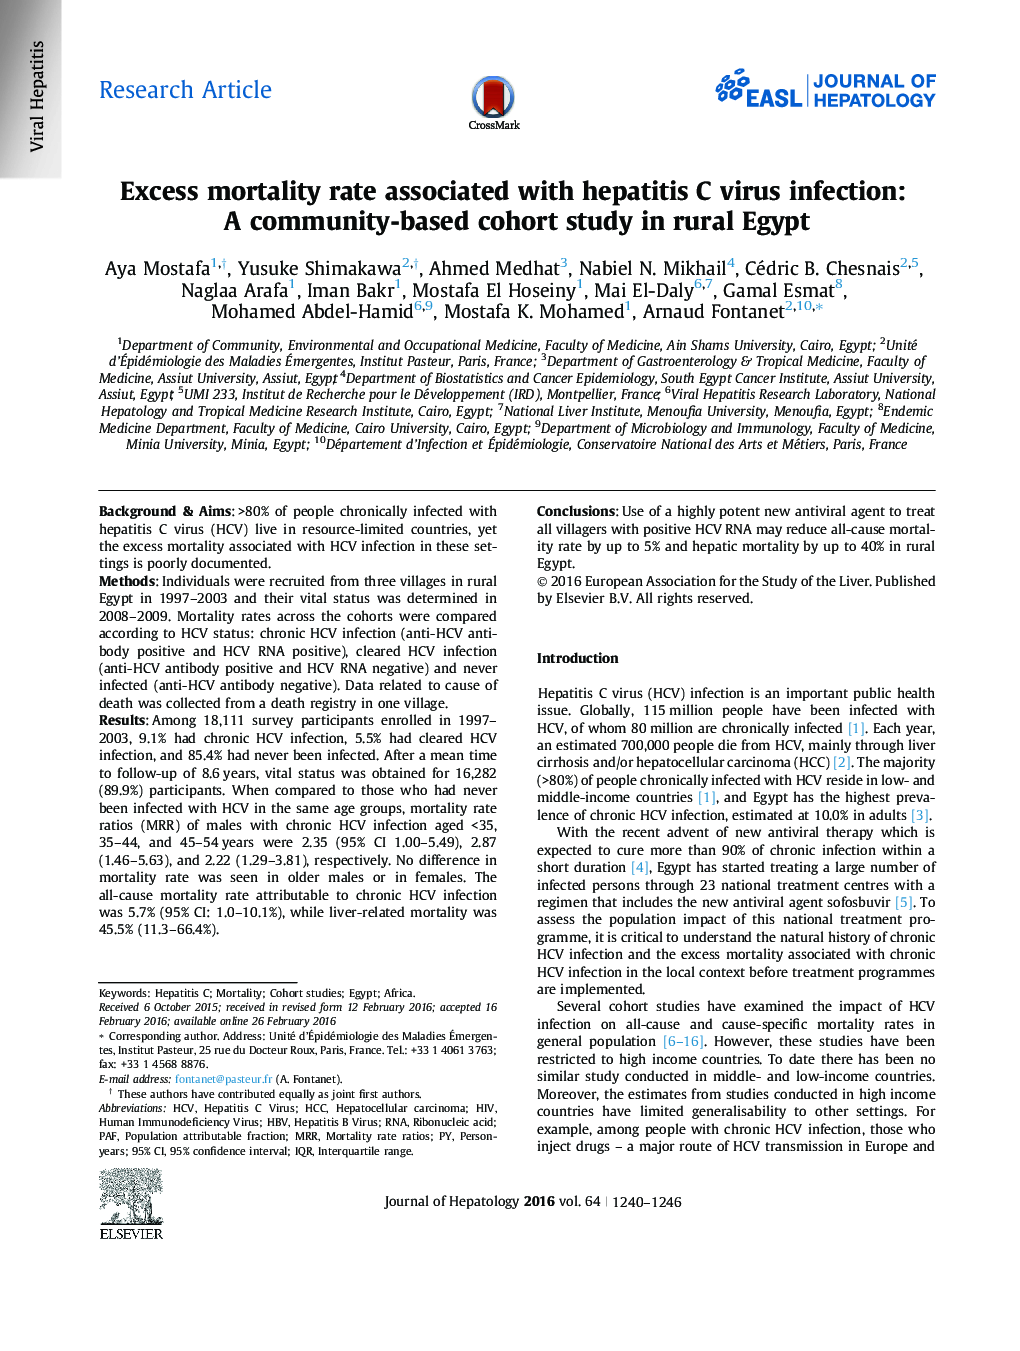 Research ArticleExcess mortality rate associated with hepatitis C virus infection: A community-based cohort study in rural Egypt